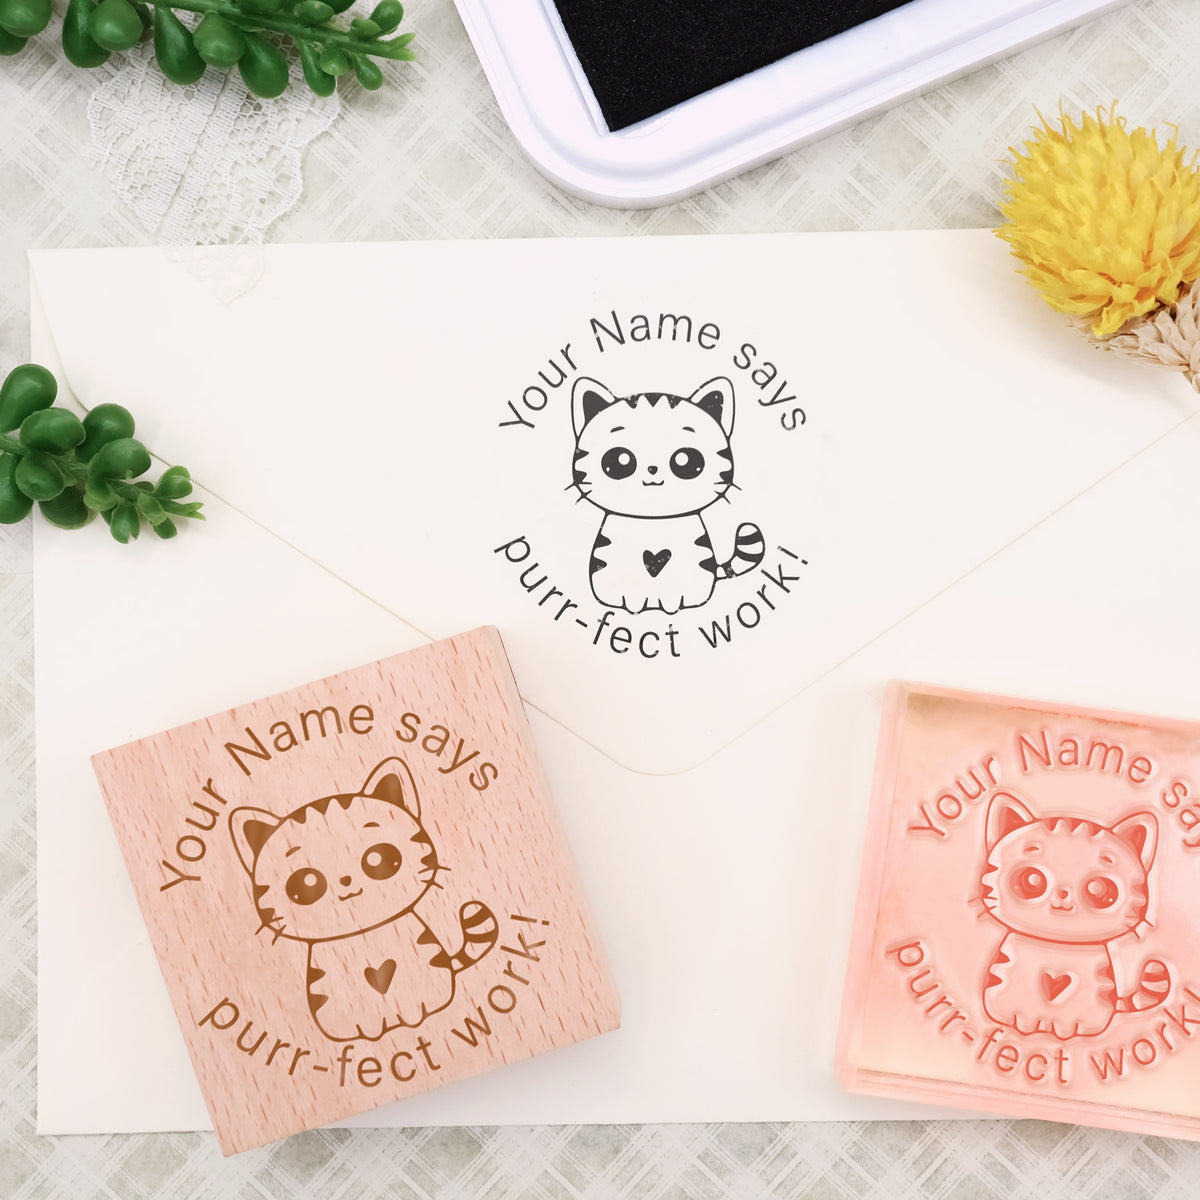 Ready Made Rubber Stamp - Cute Cartoon Style Scrapbook Stamp Set